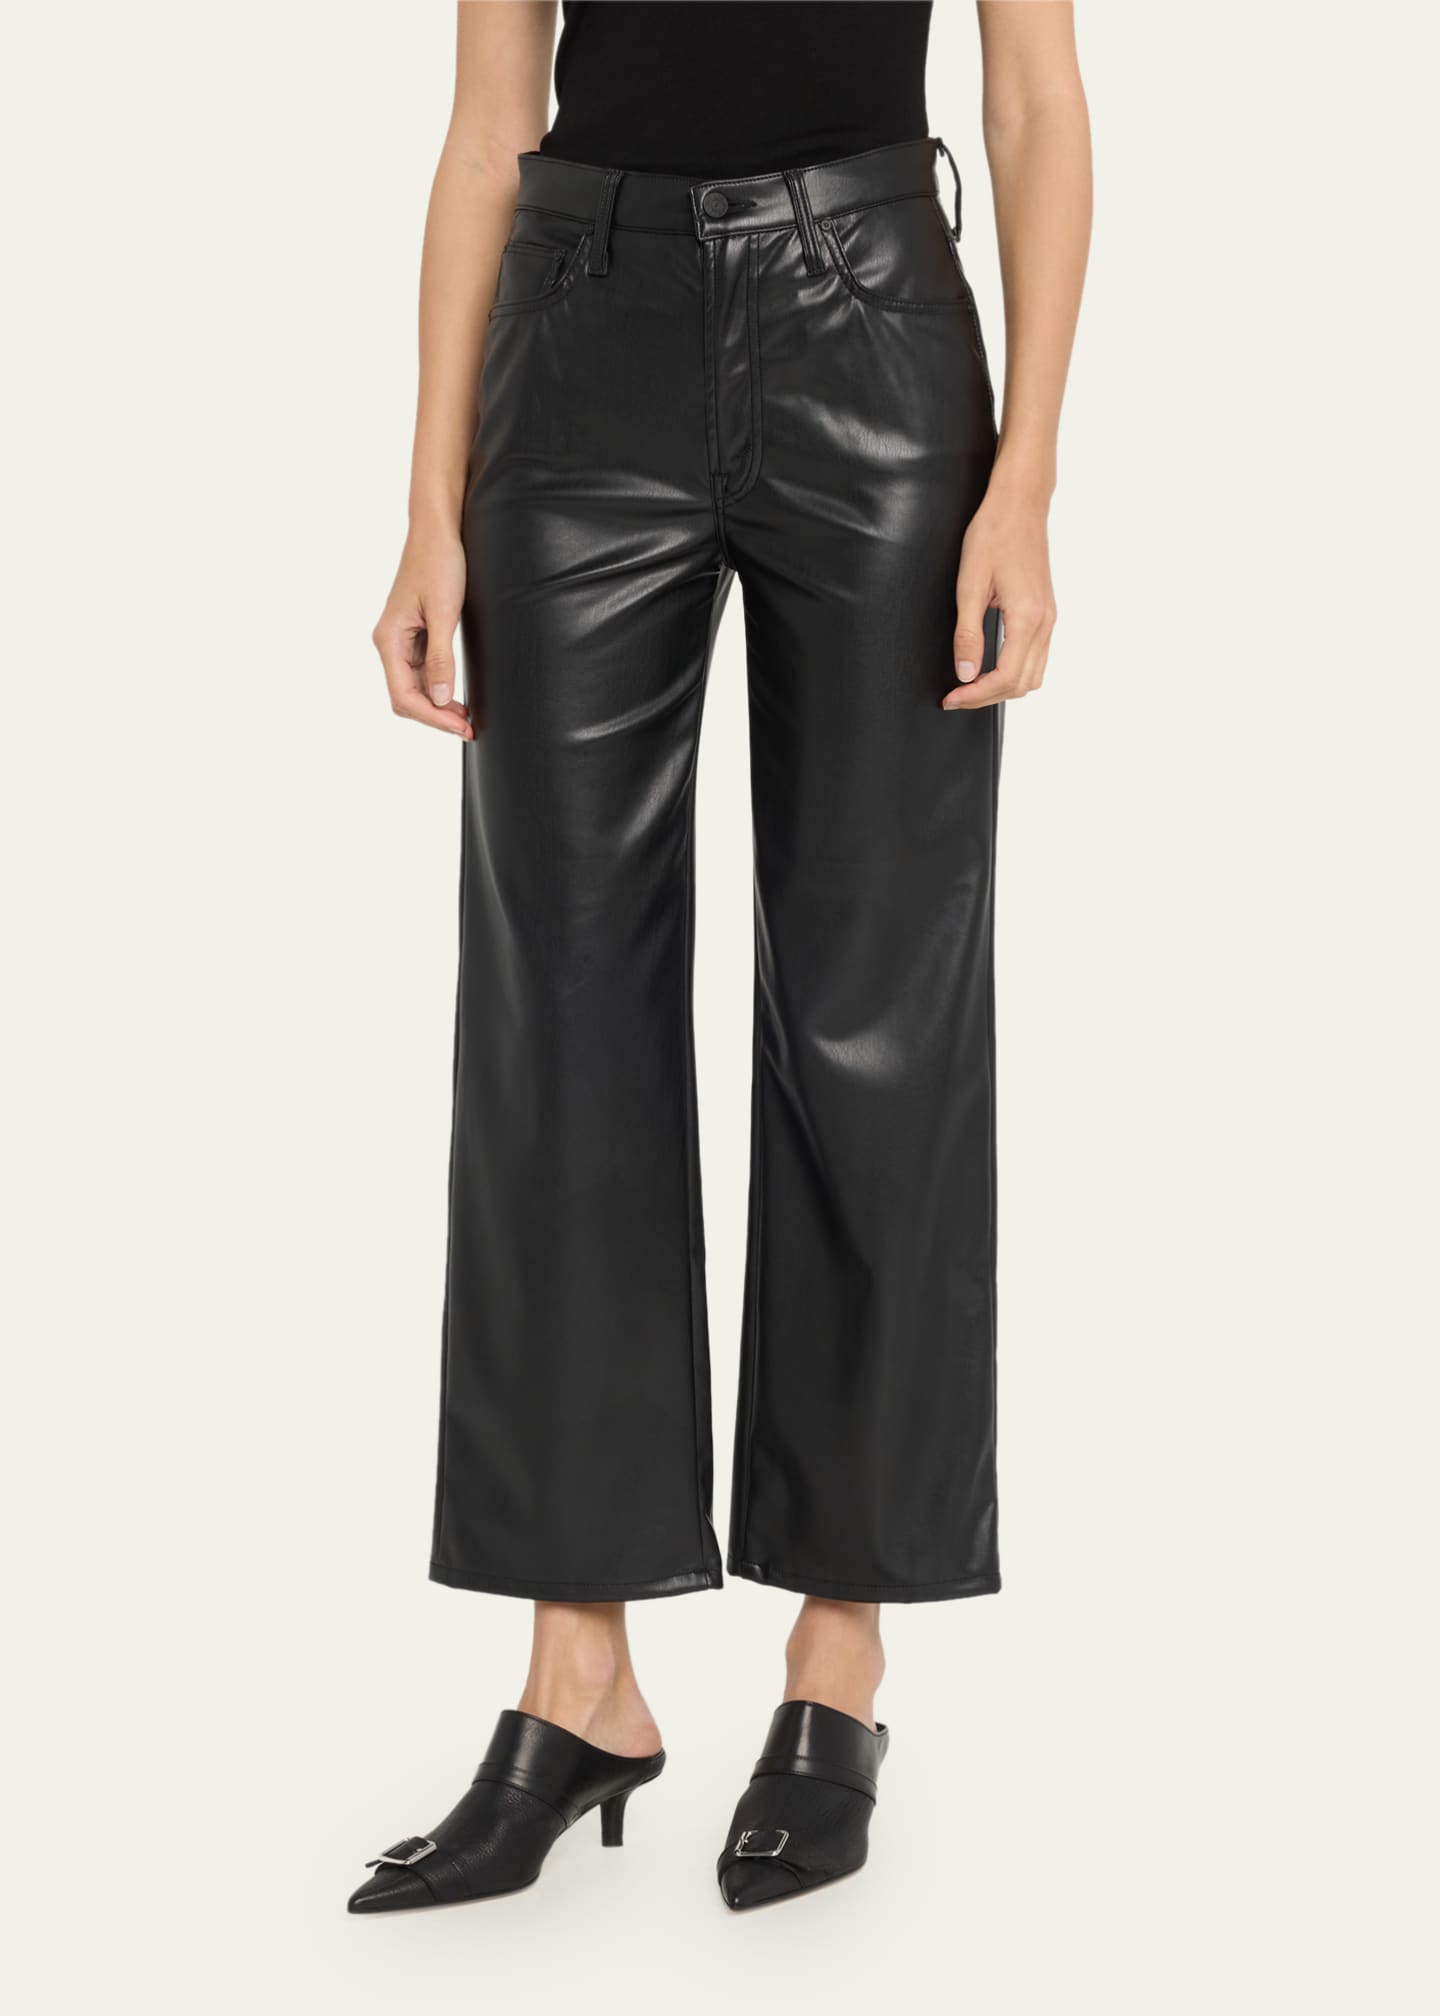 MOTHER The Rambler Zip Ankle Faux-Leather Pants - Bergdorf Goodman